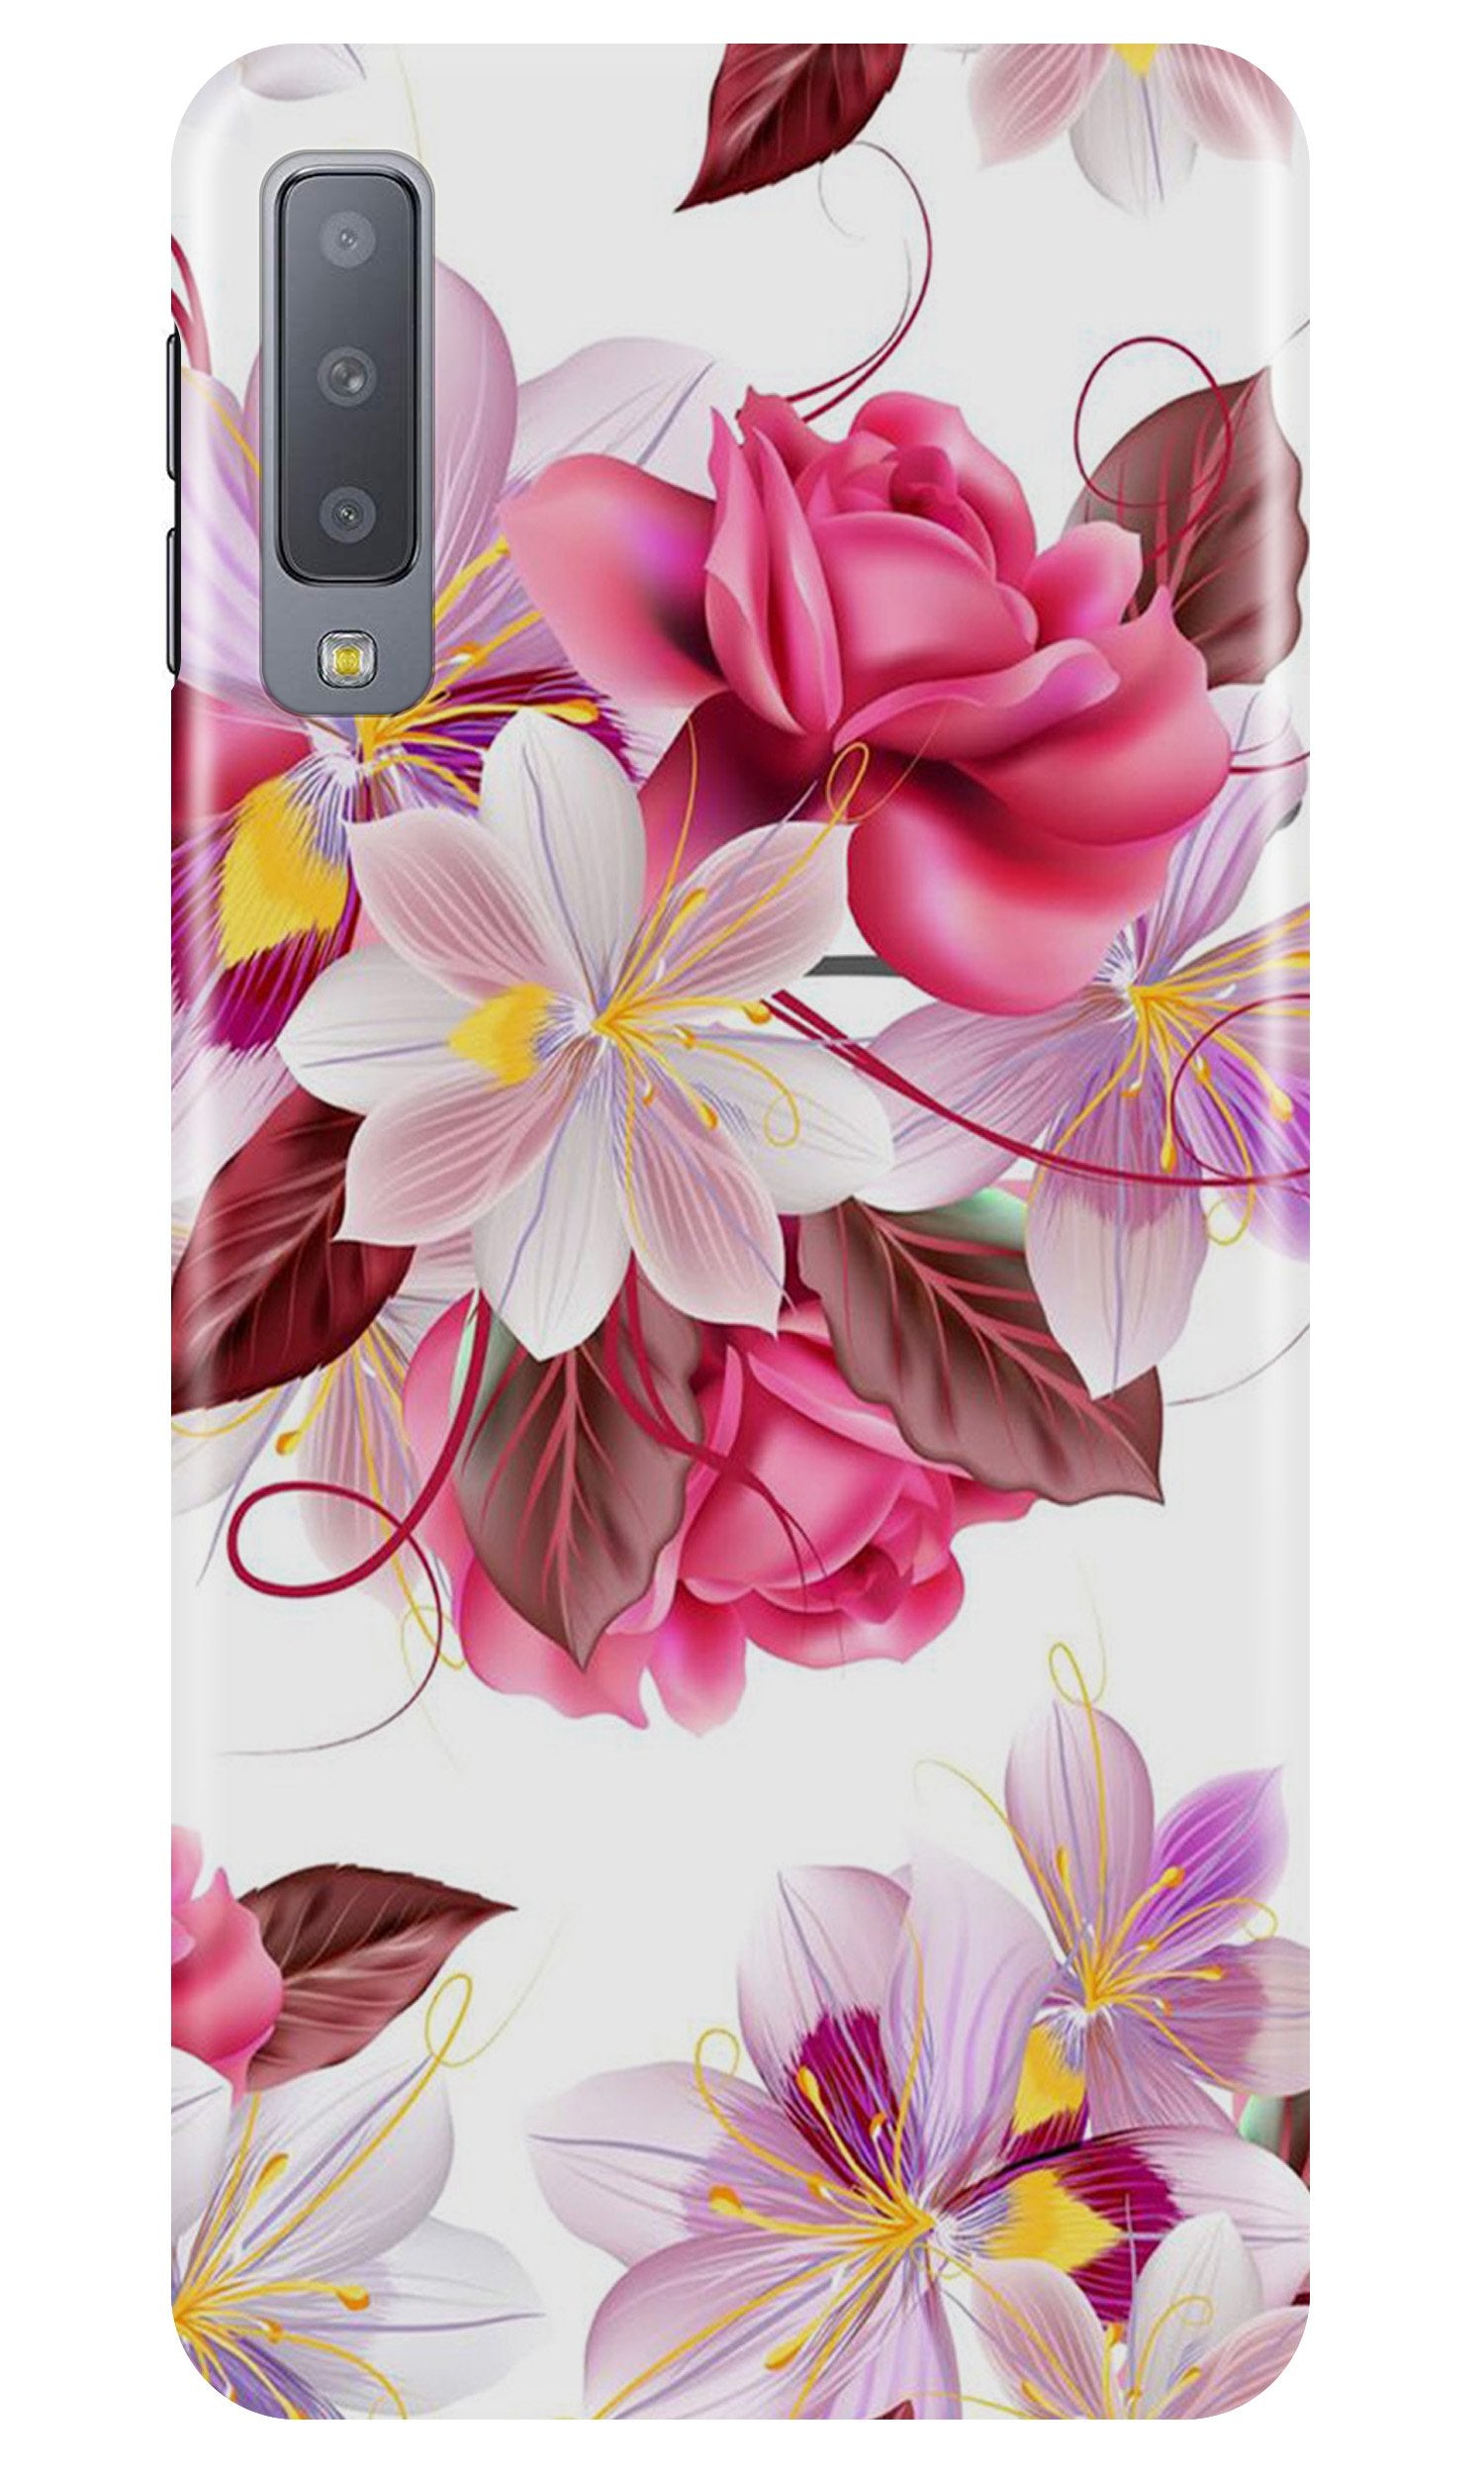 Beautiful flowers Case for Galaxy A7 (2018)